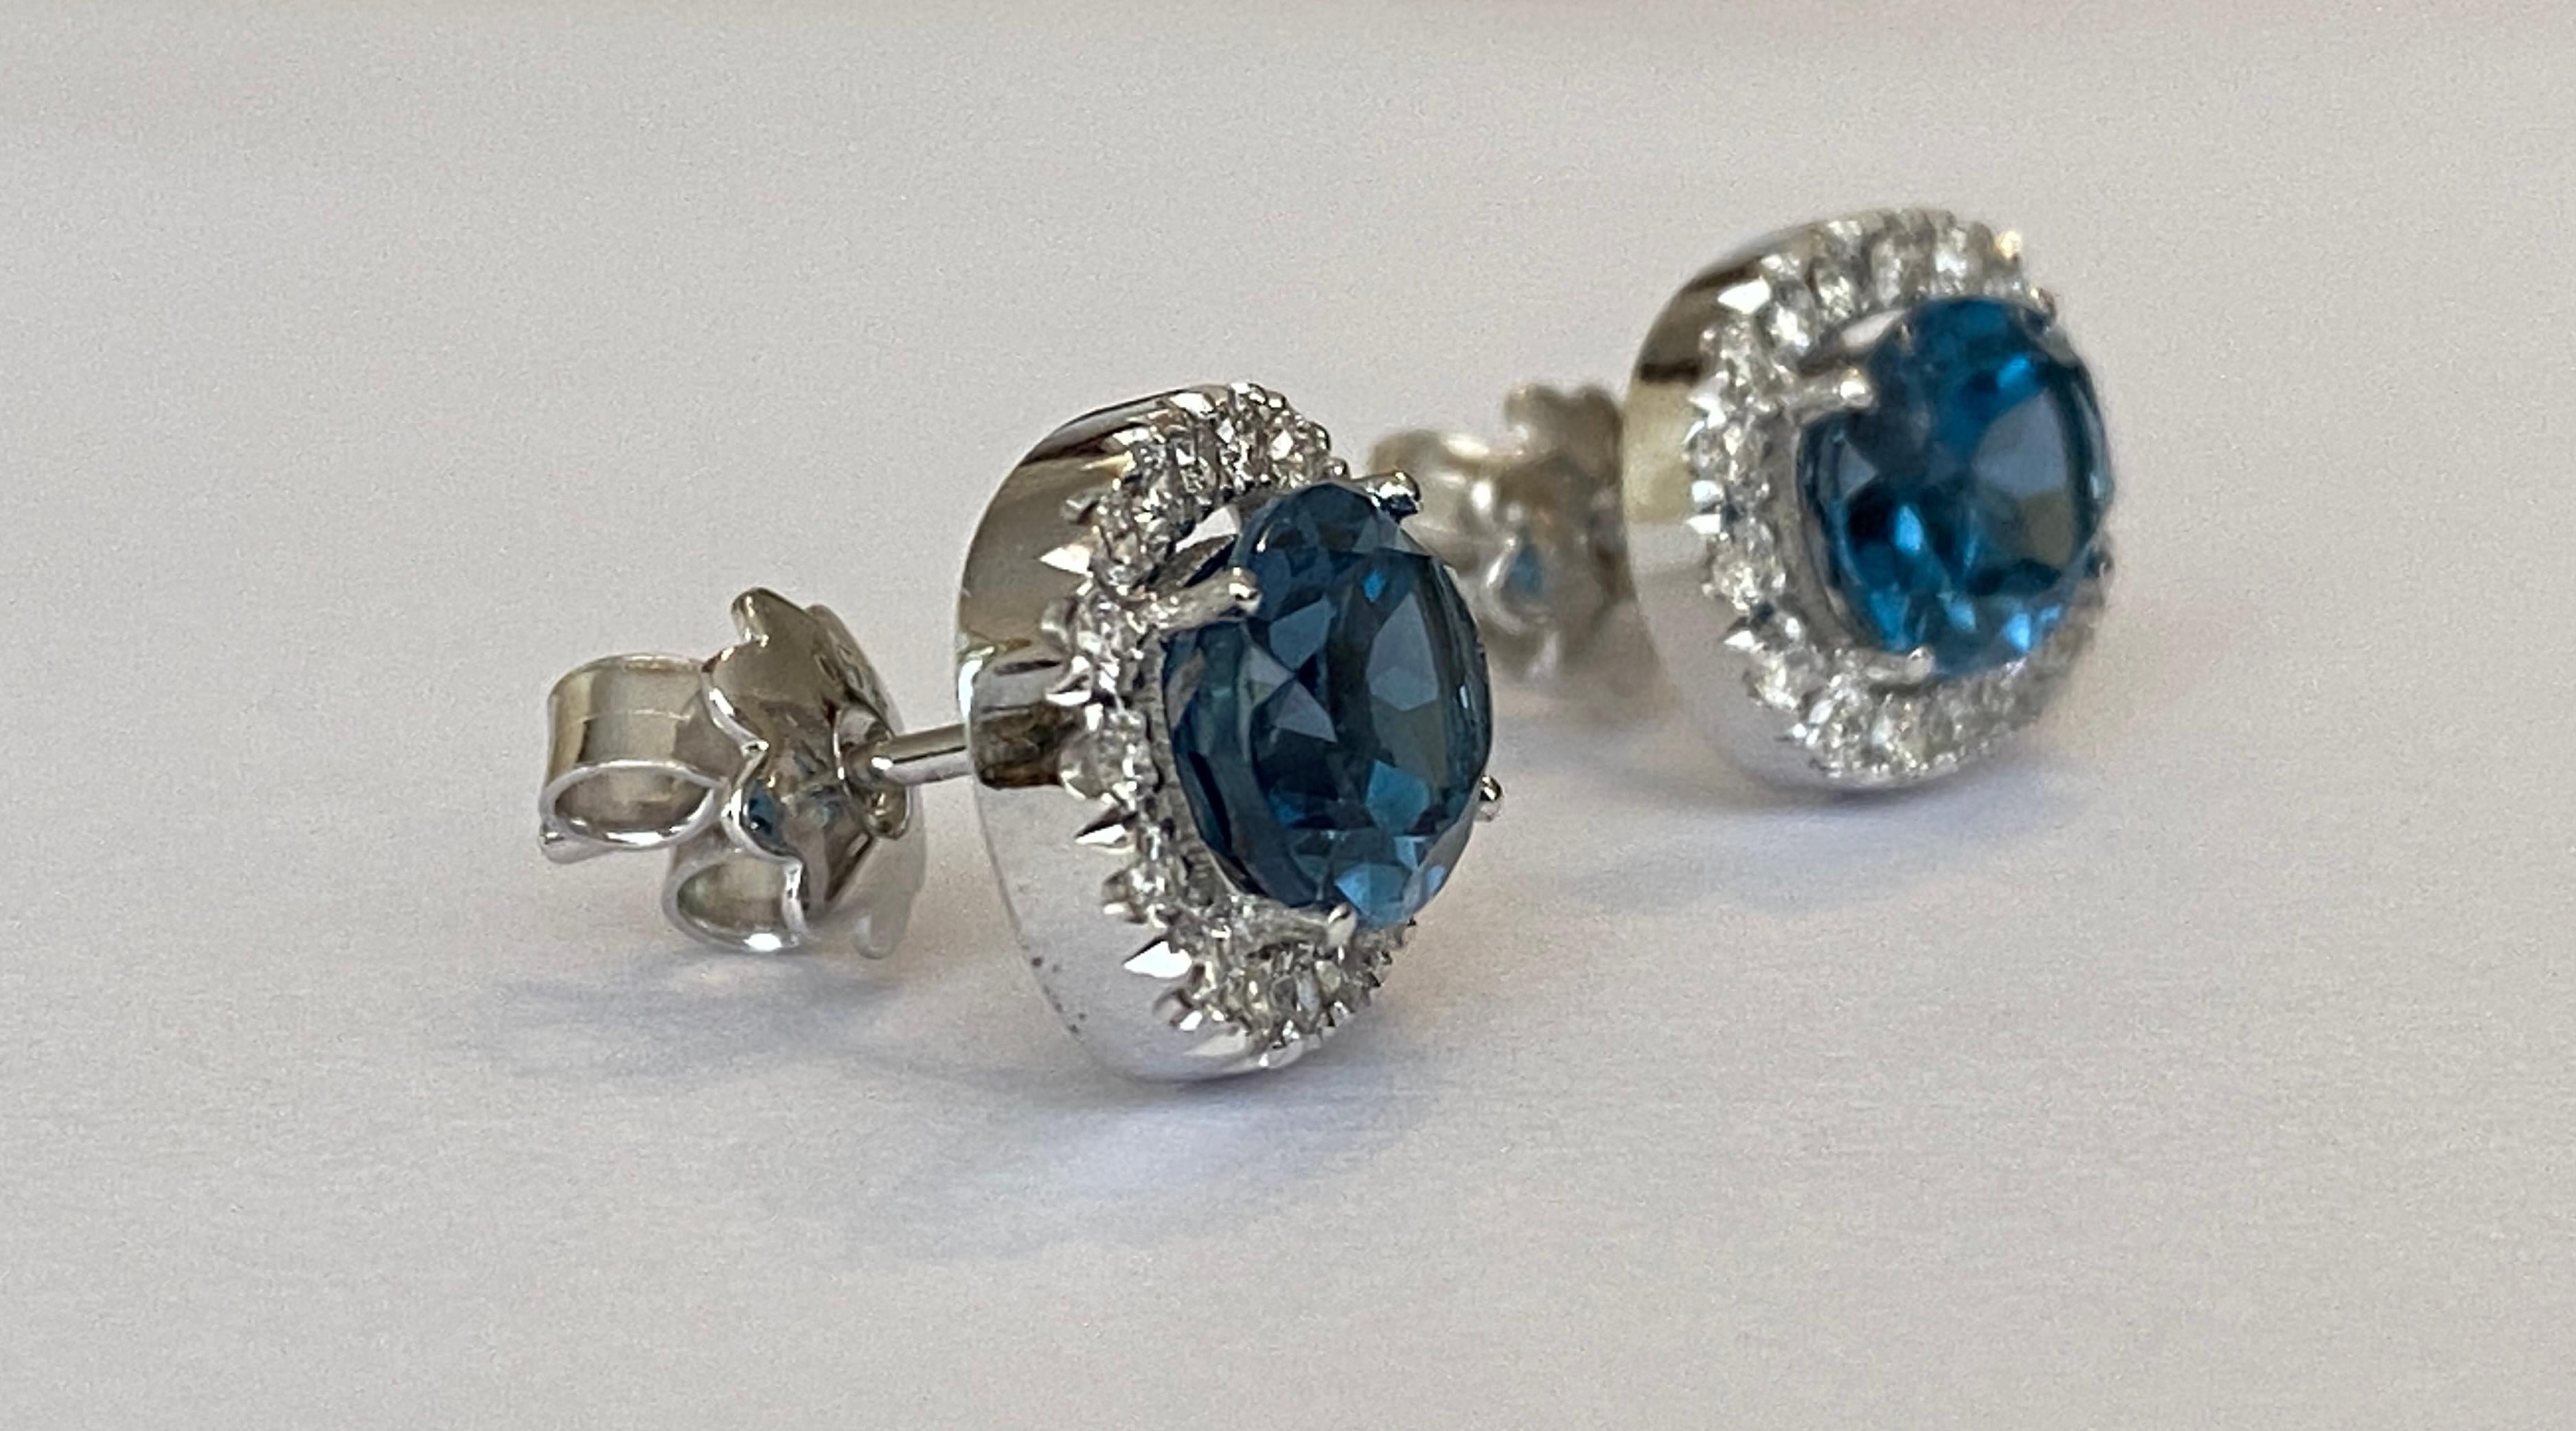 18 kt white gold Diamond earrings studs with London Blue Topaz For Sale 4